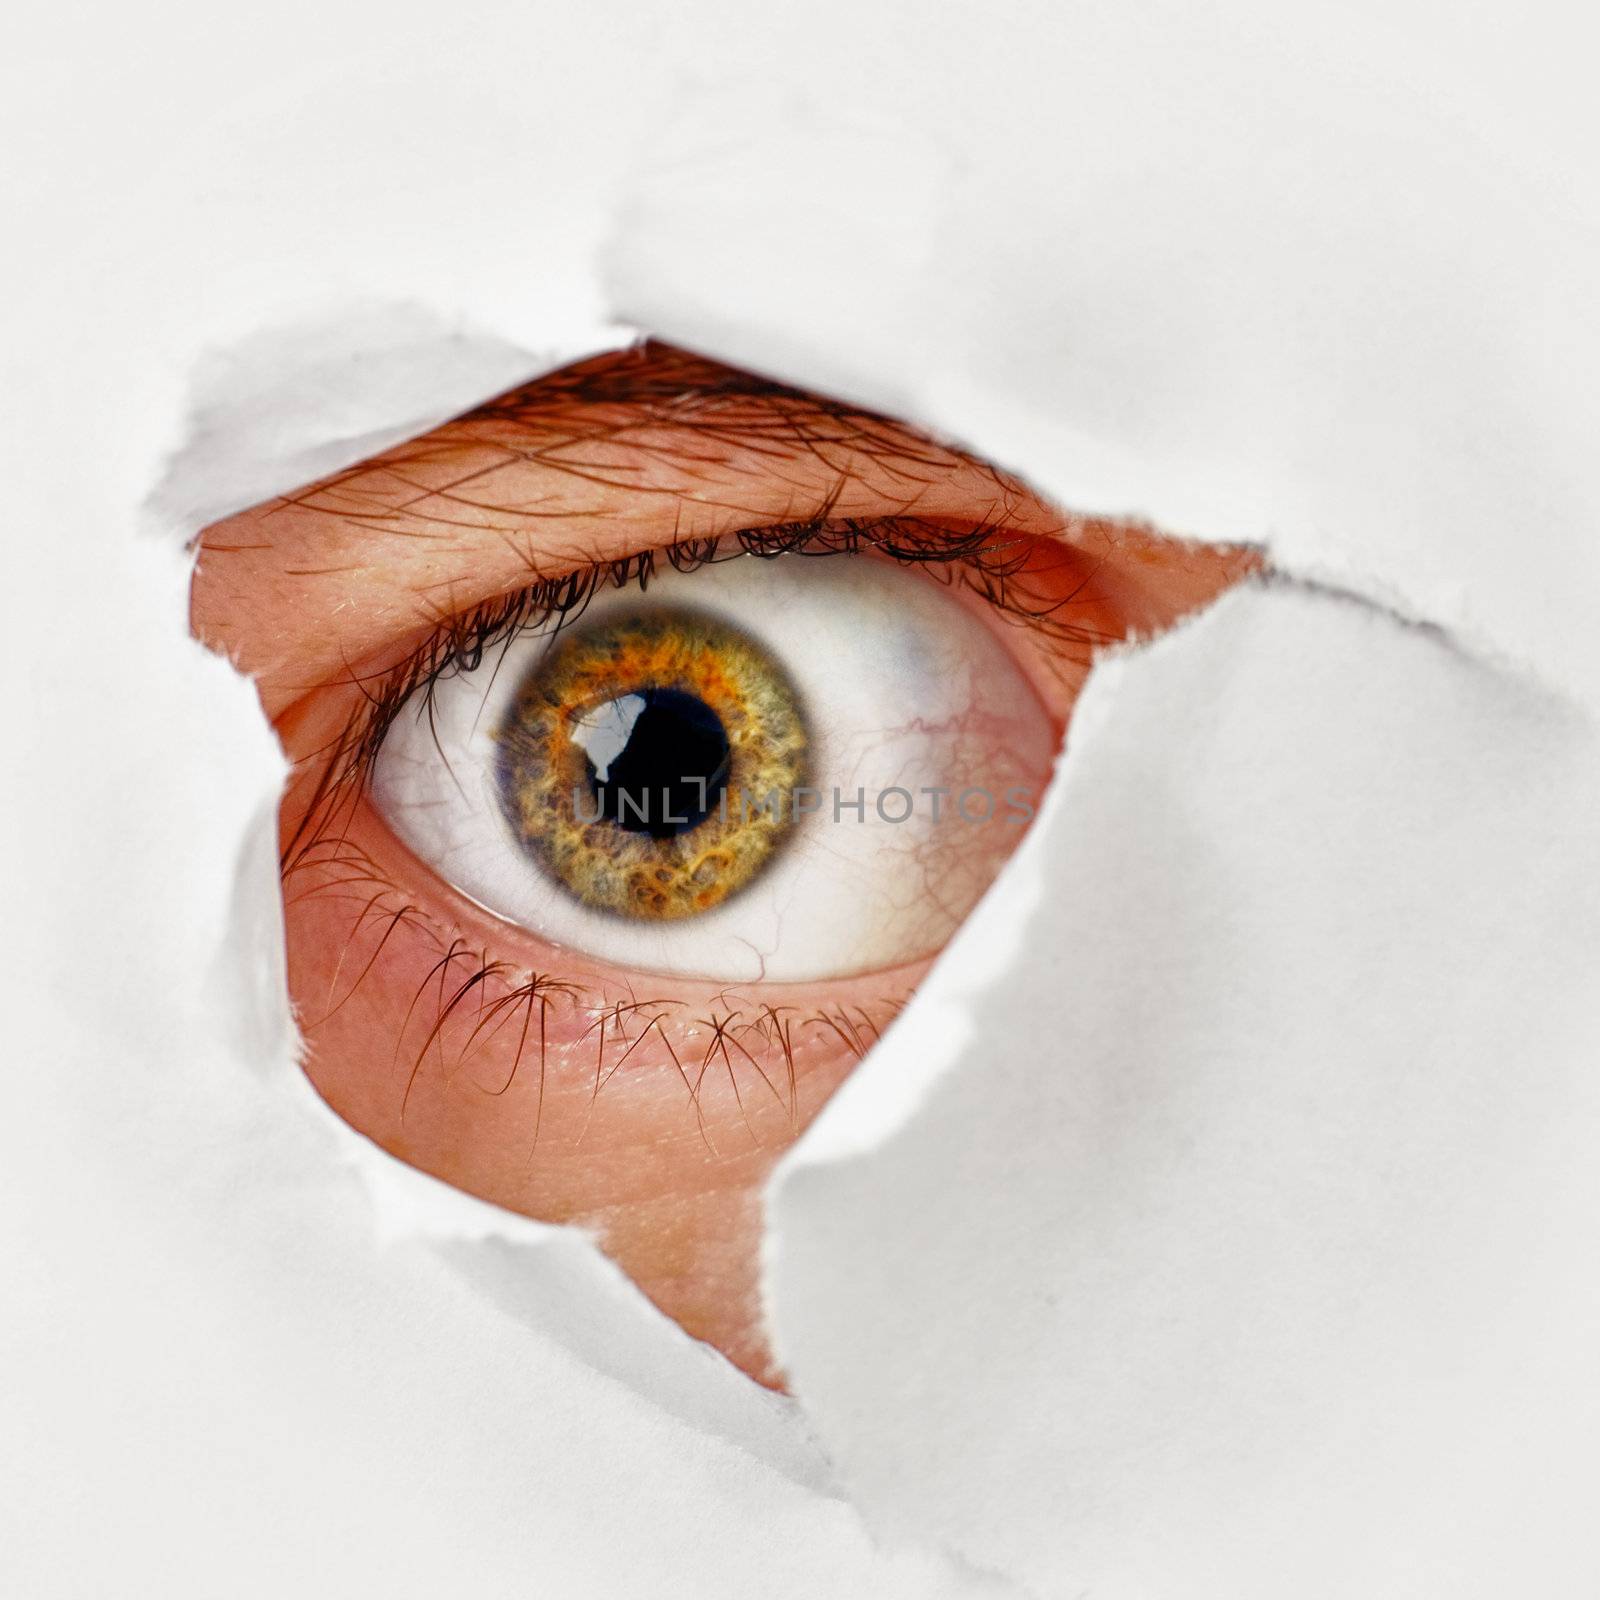 Eye looks through a hole in the paper - spy by pzaxe